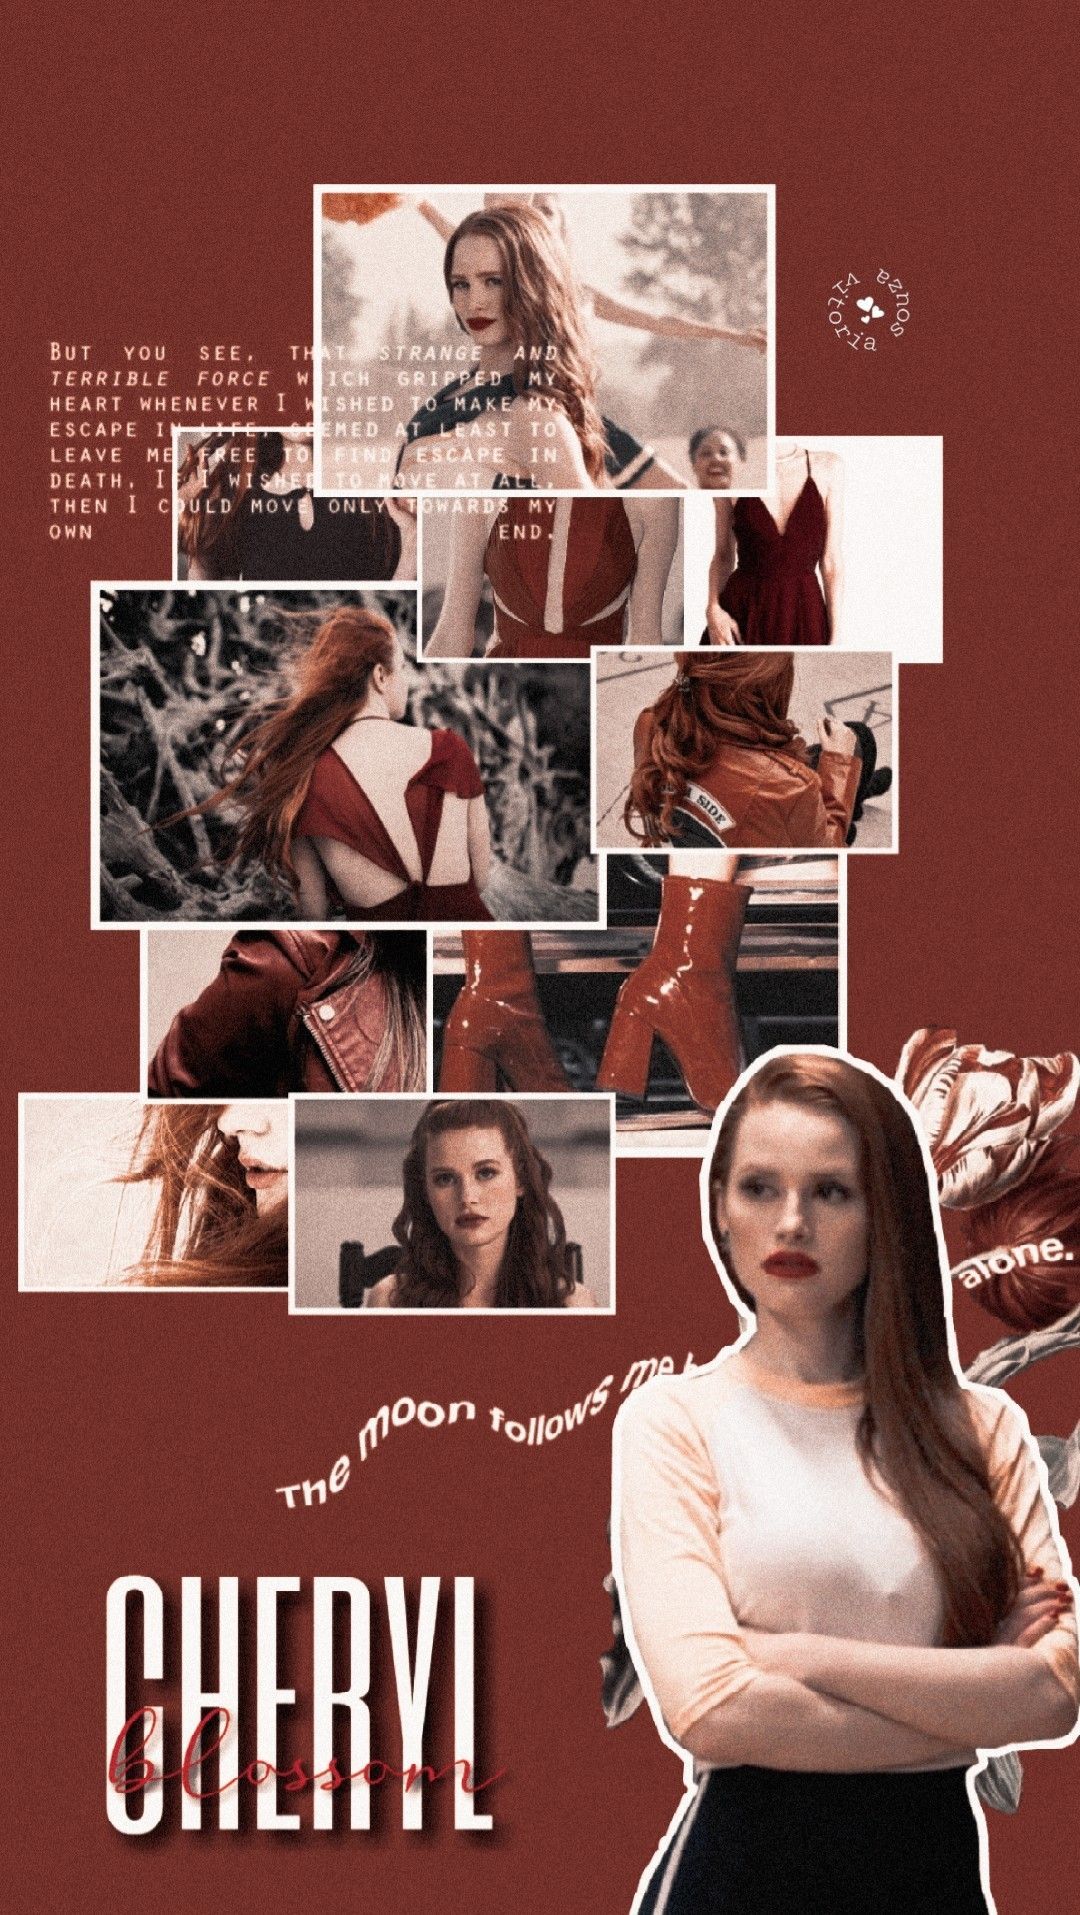 A Cheryl Blossom wallpaper featuring her in different outfits and quotes from the show. - Riverdale